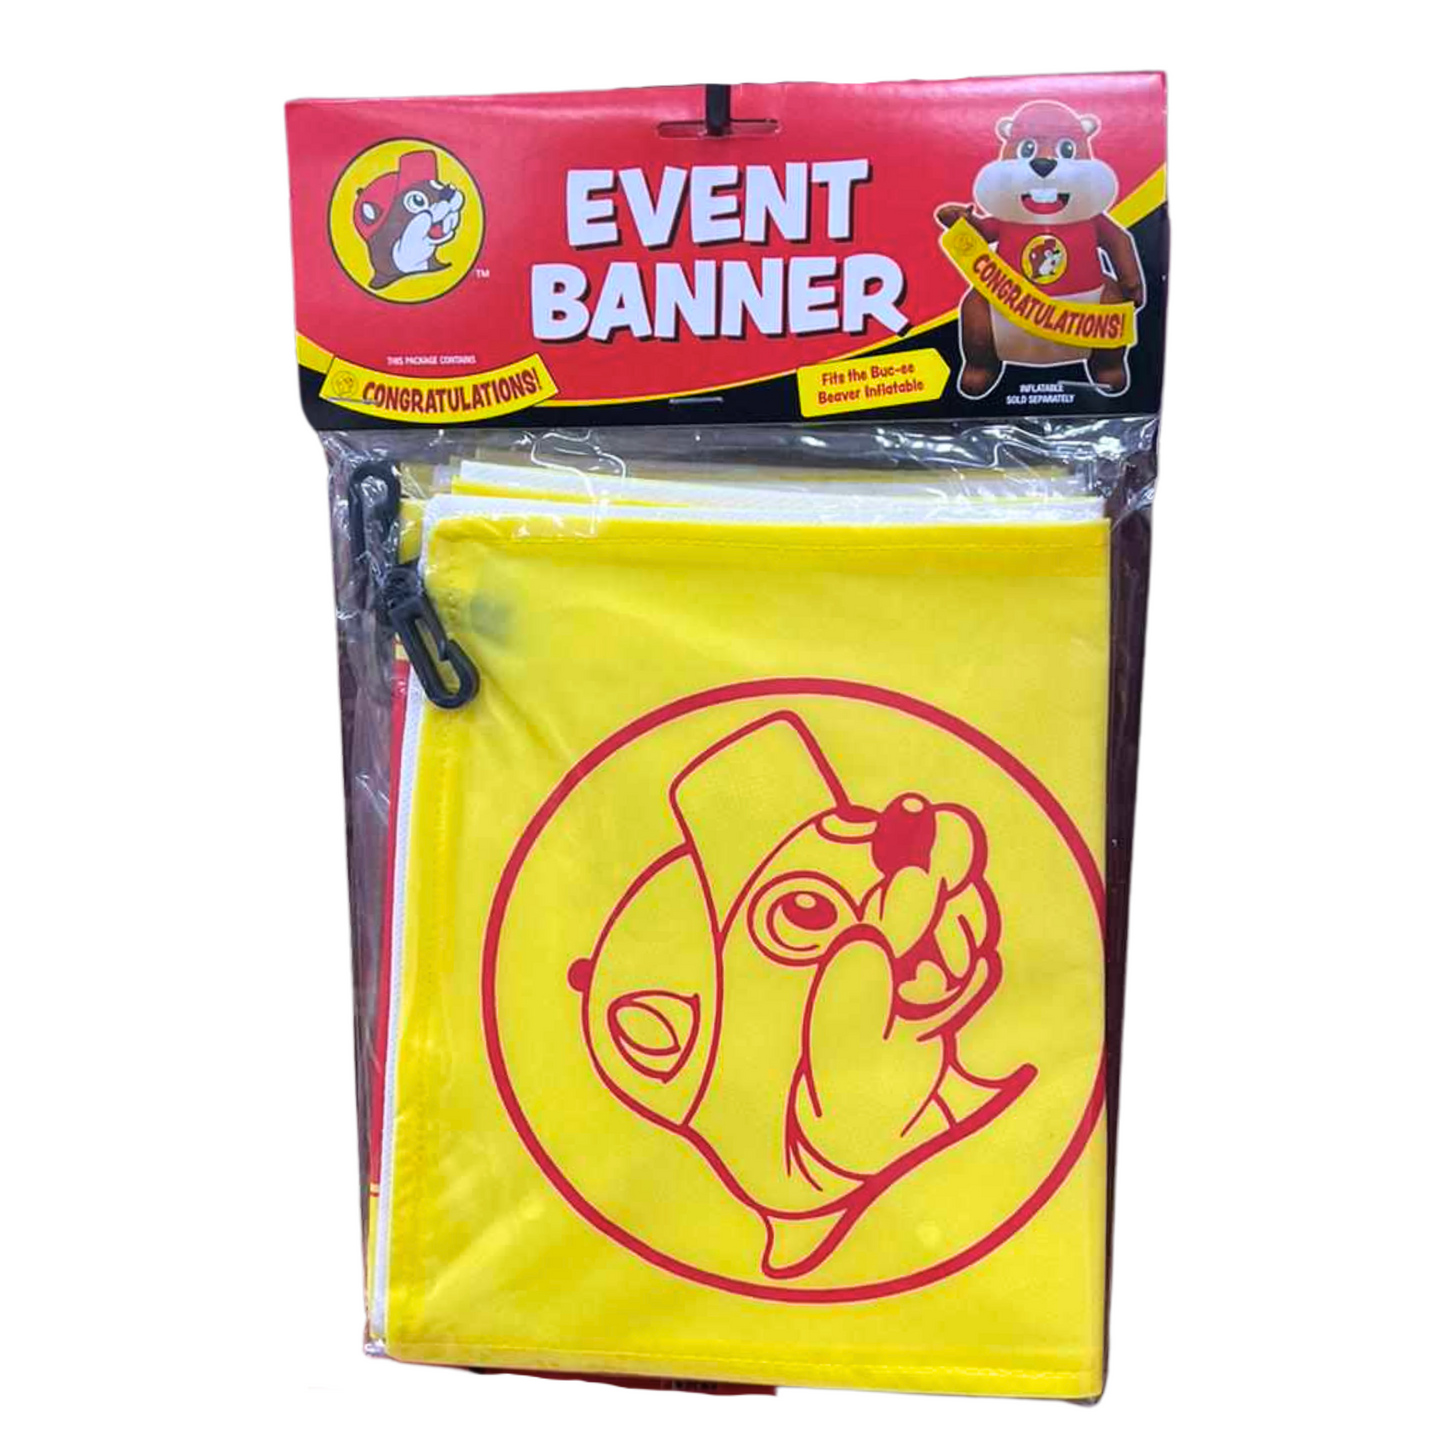 Buc-ee's Event Banner Party Time buc ees buc ee's bucees buccees buc-ees